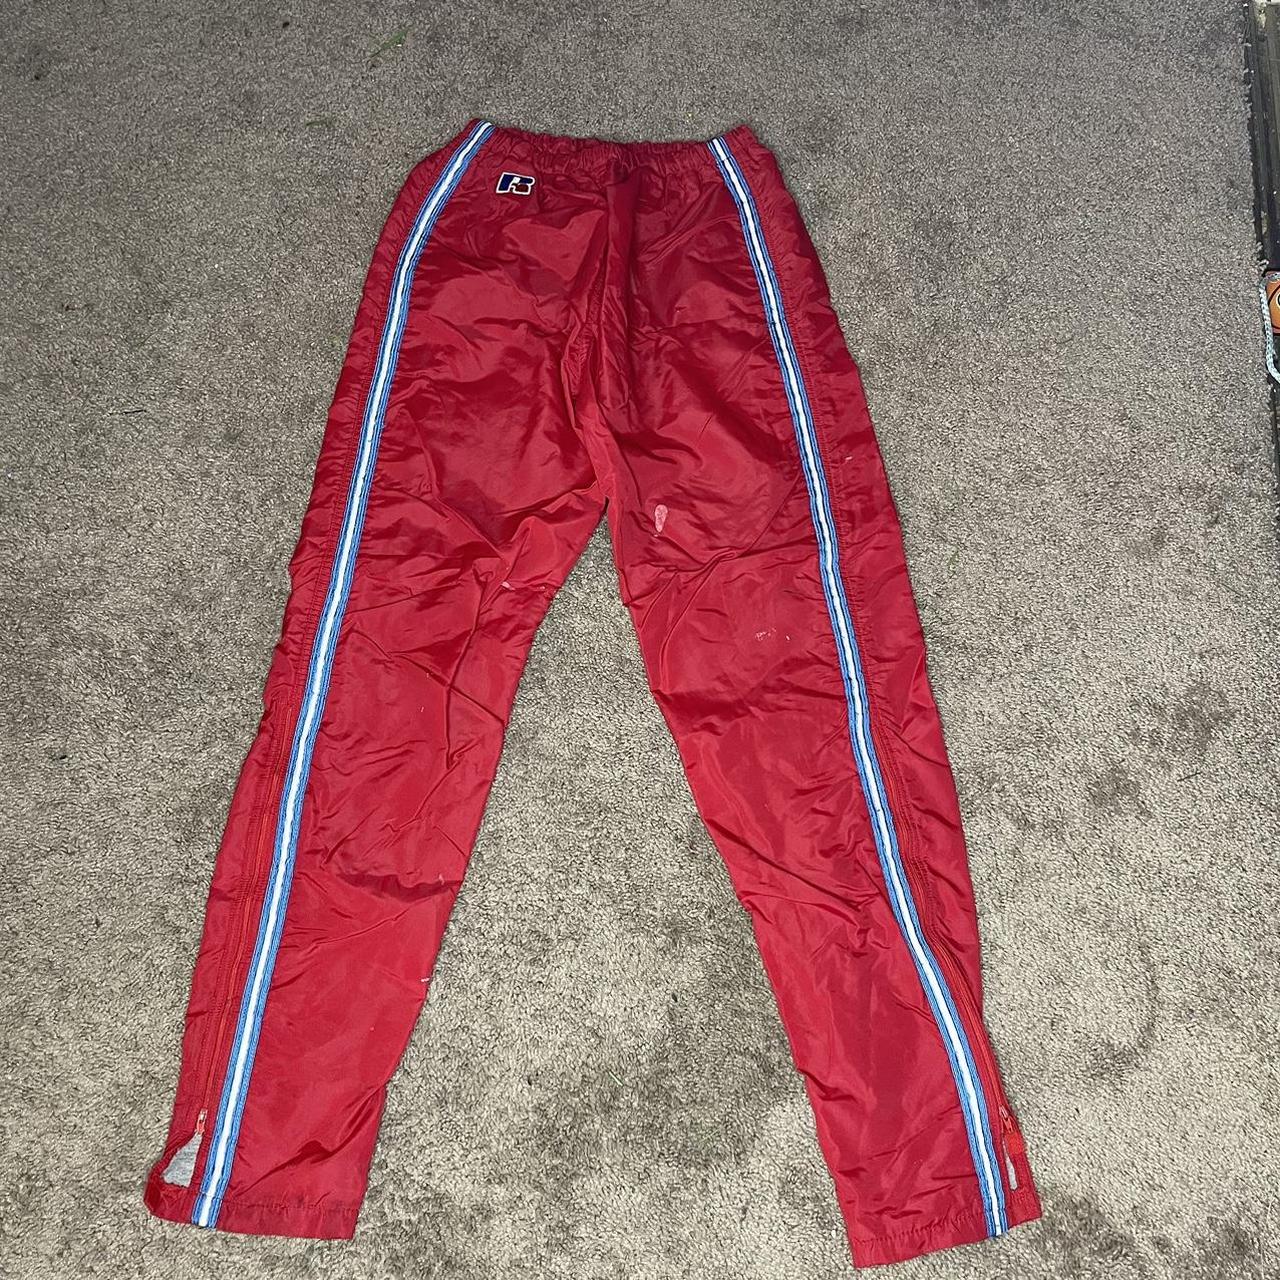 Vintage 80s Track Pants Men's Size Small Red White Small